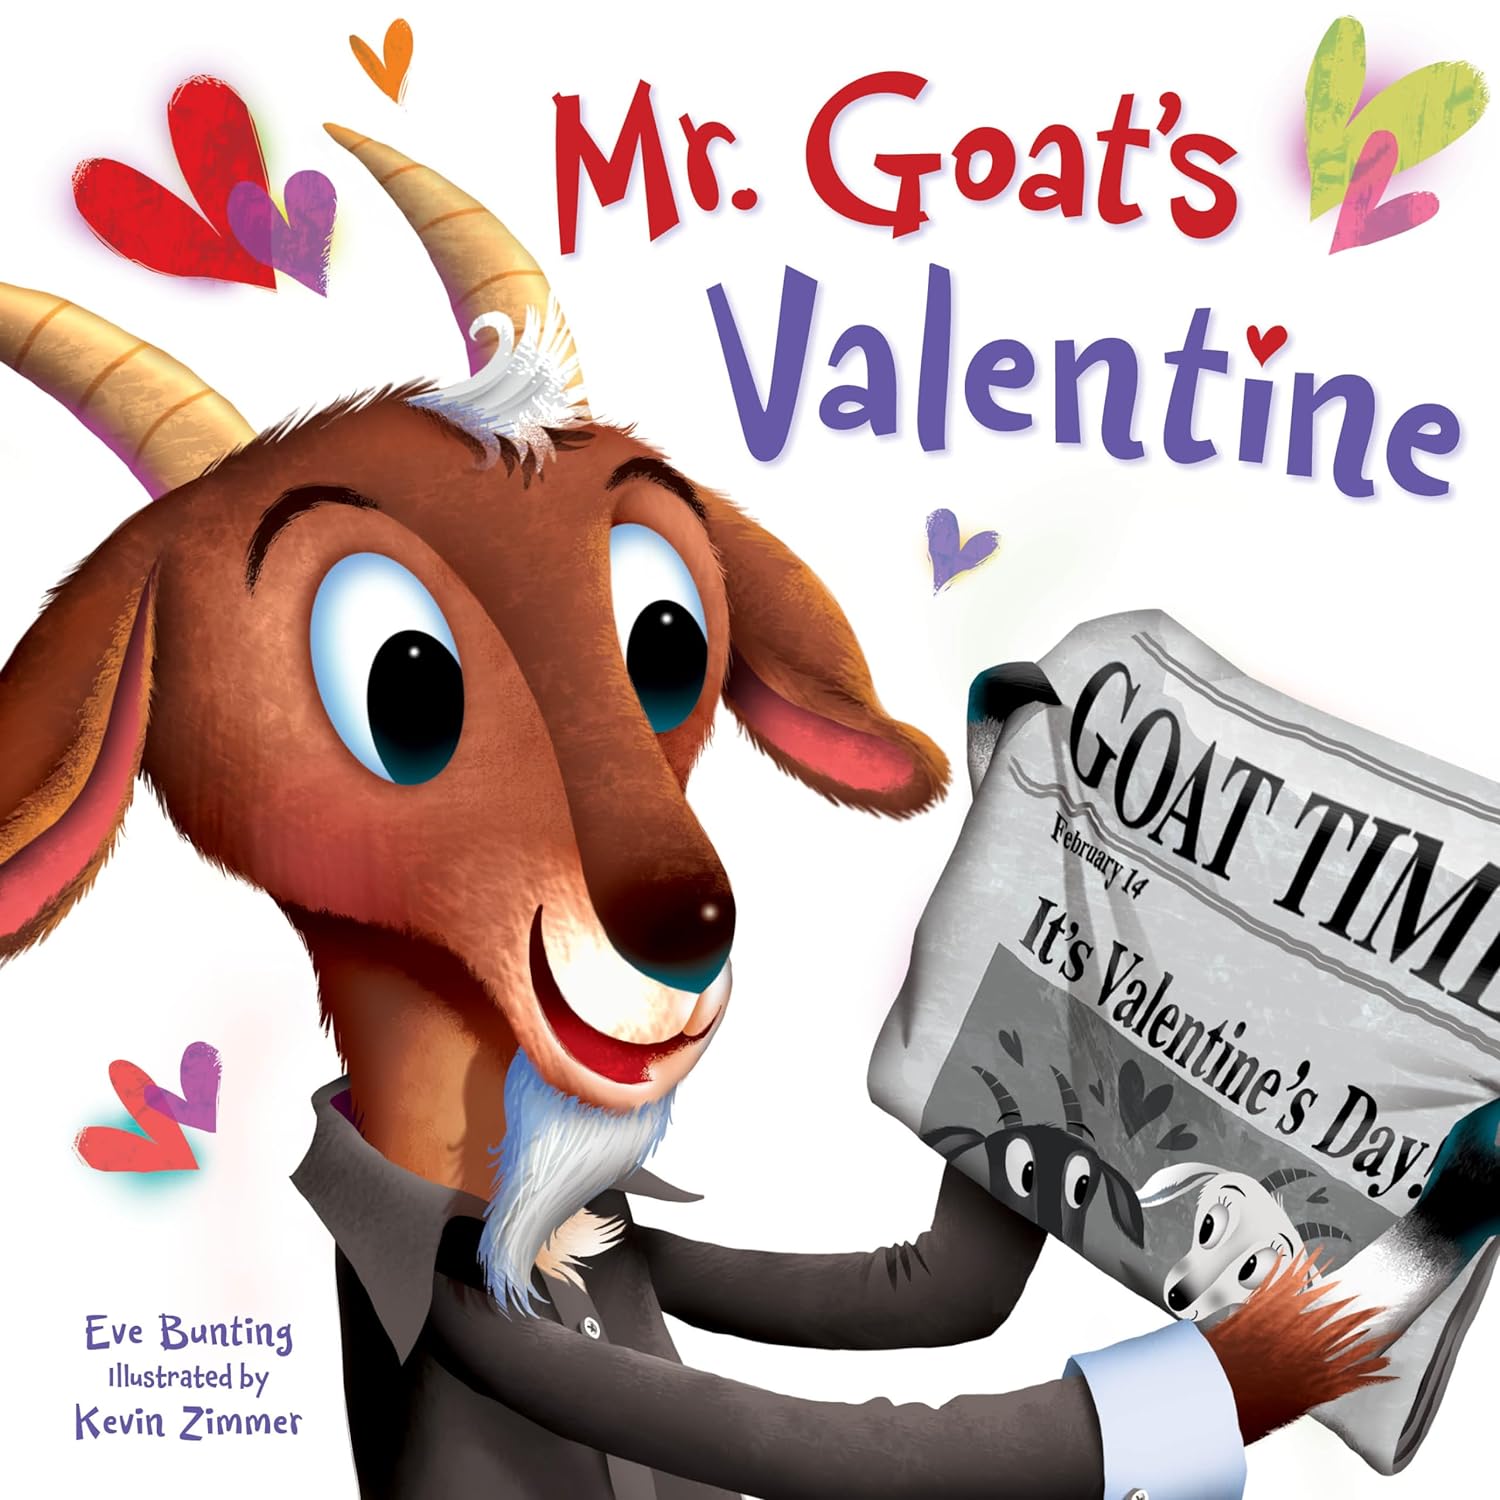 Cover features Goat holding a newspaper 